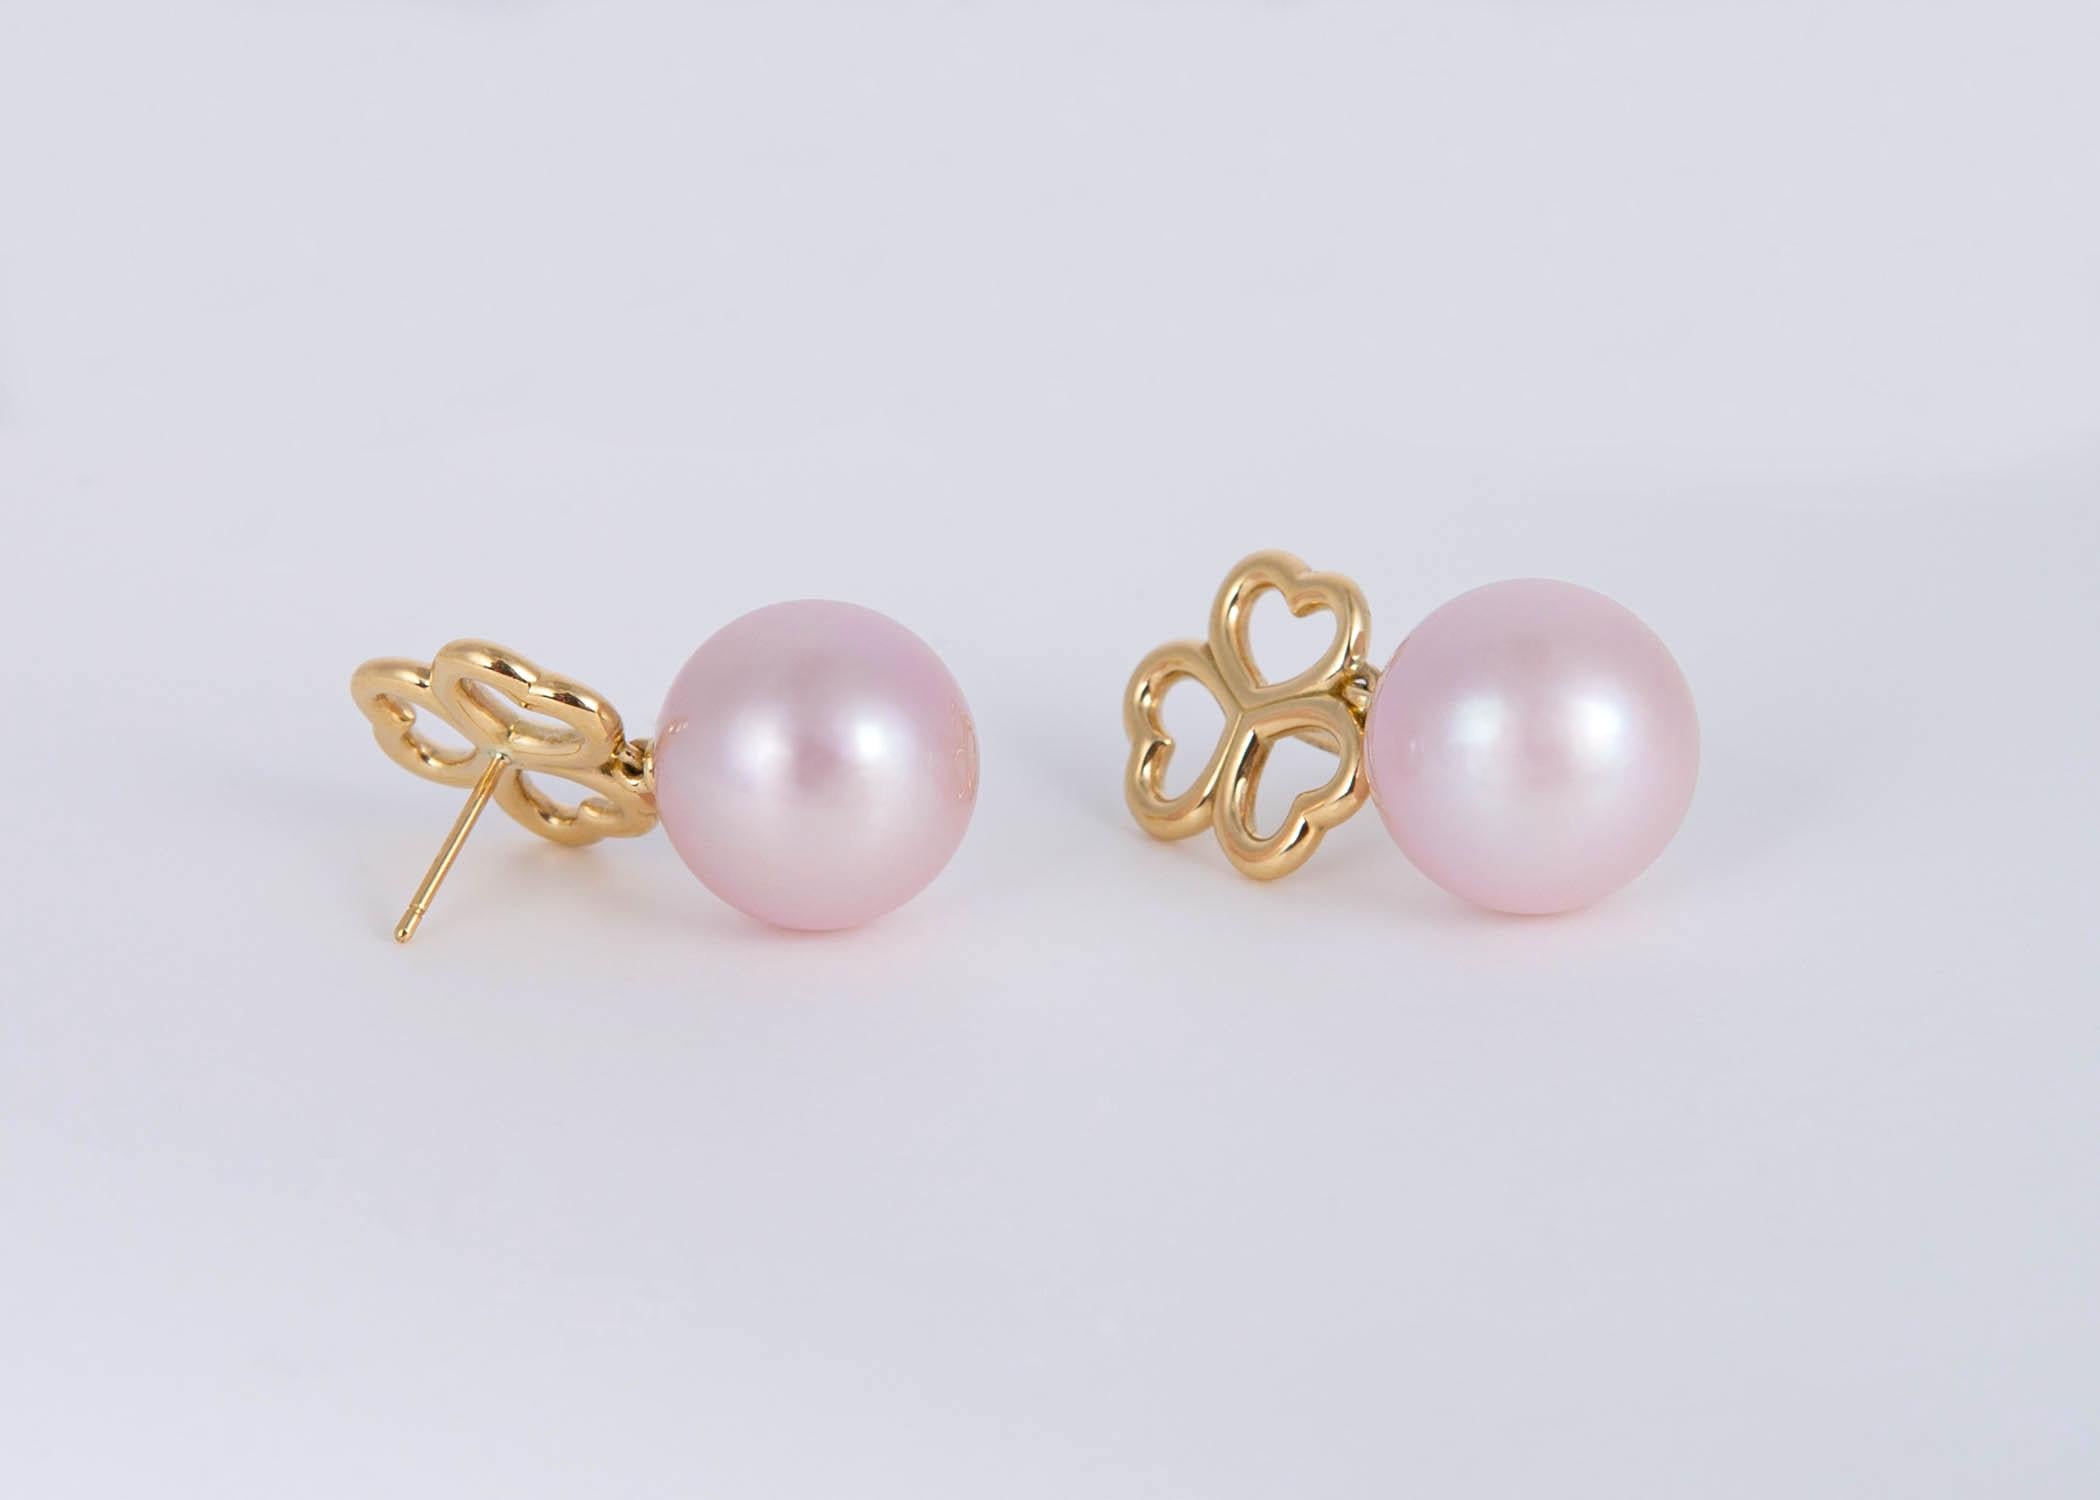 A classic three heart gold top and 13.7 mm pastel pink fresh water pearls combine to make a beautiful classic wearable earring. Tiffany quality and design. Just over 1 inch in length. 